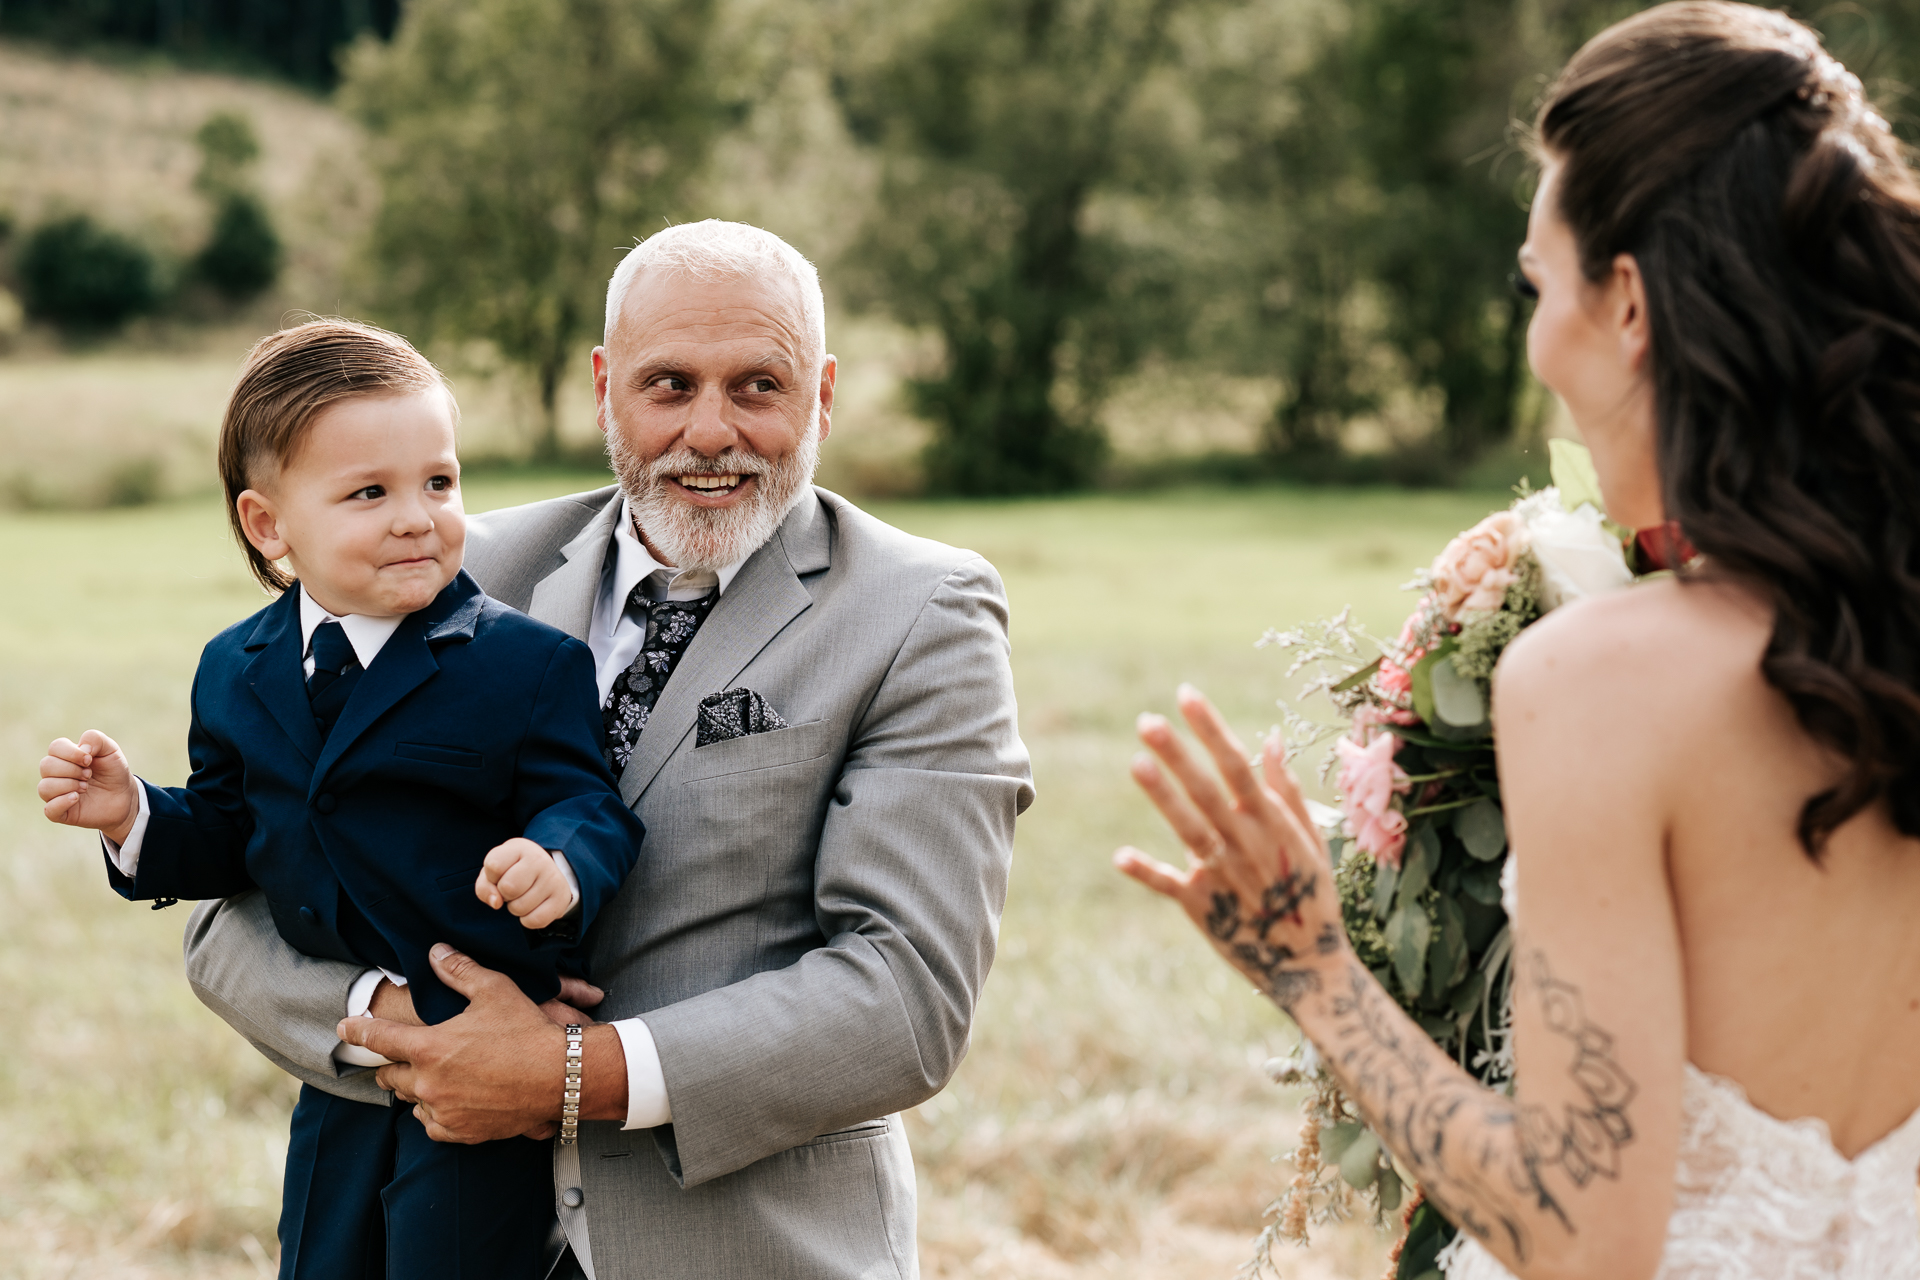 Father of the bride and son of the bride see her for the first time in her wedding dress